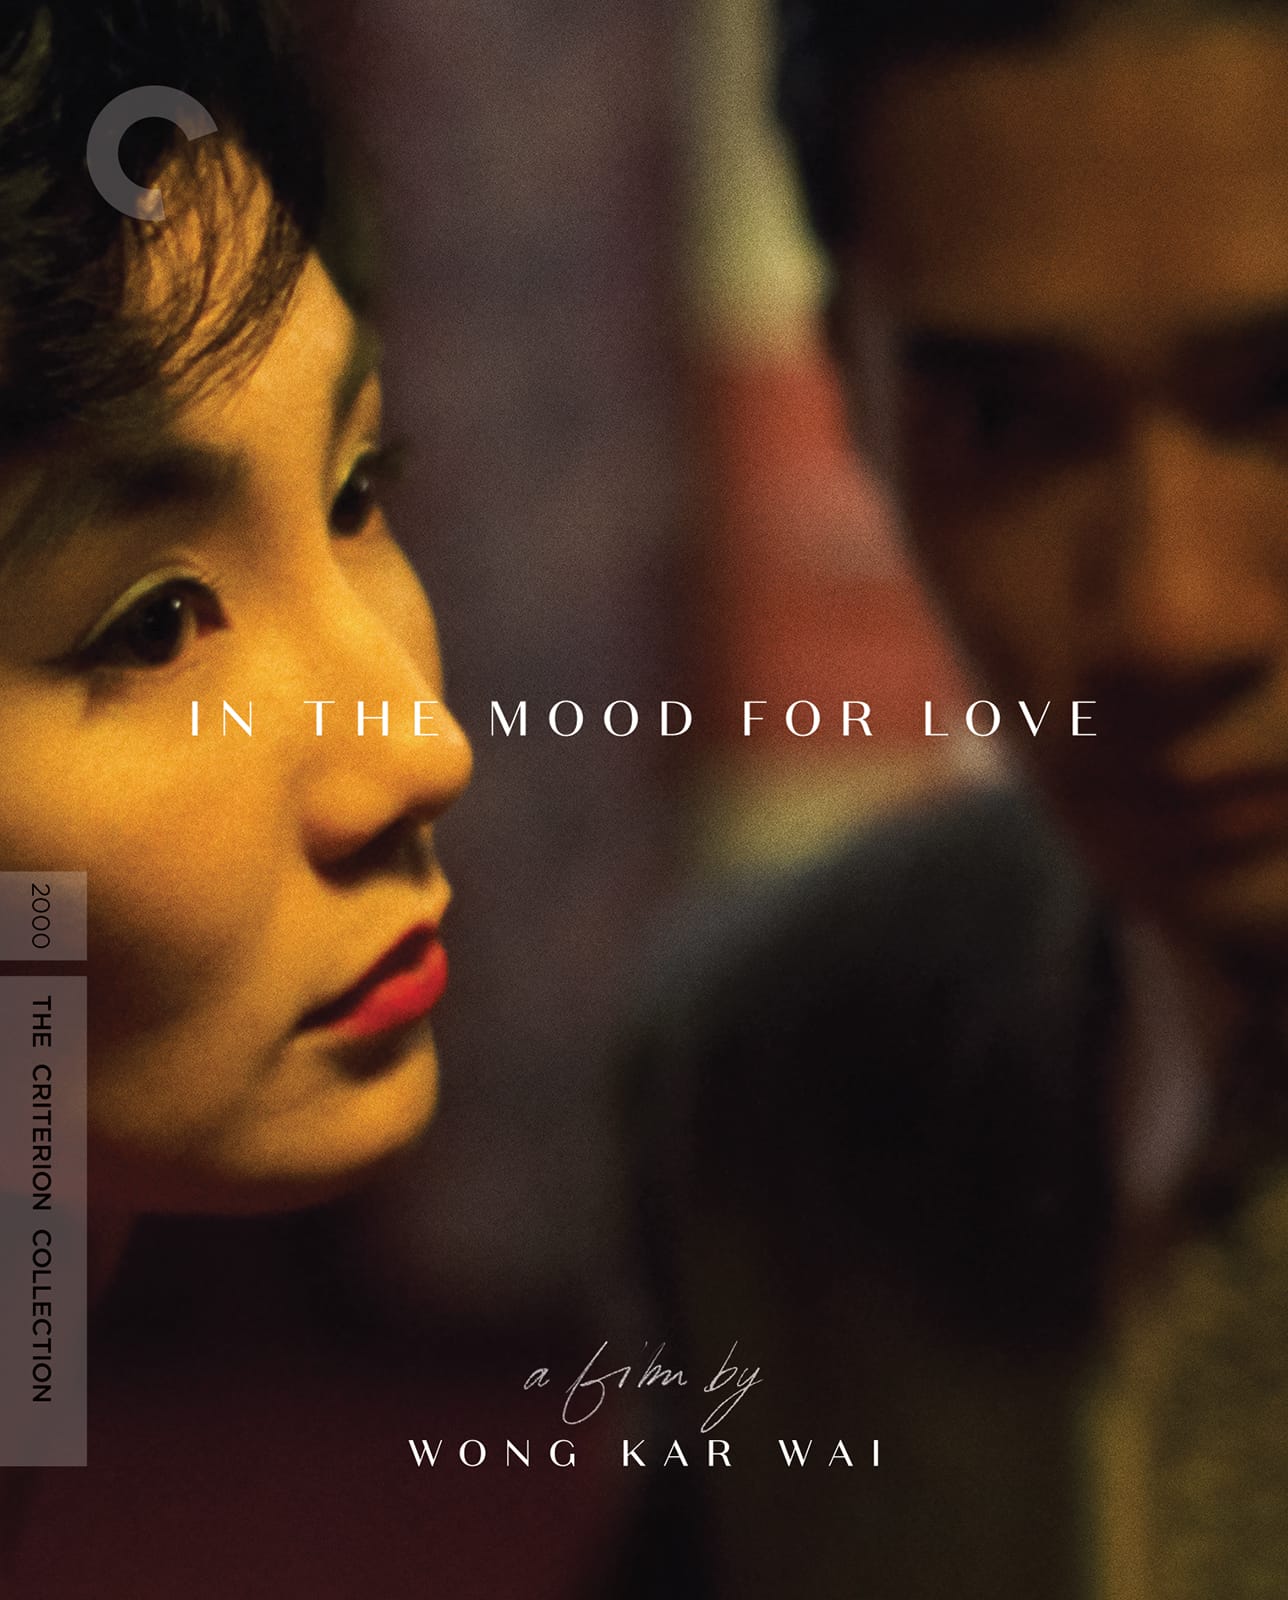 –　(Blu-ray)　Love　Mood　In　for　Criterion　DVDs　the　Music　UK　Play